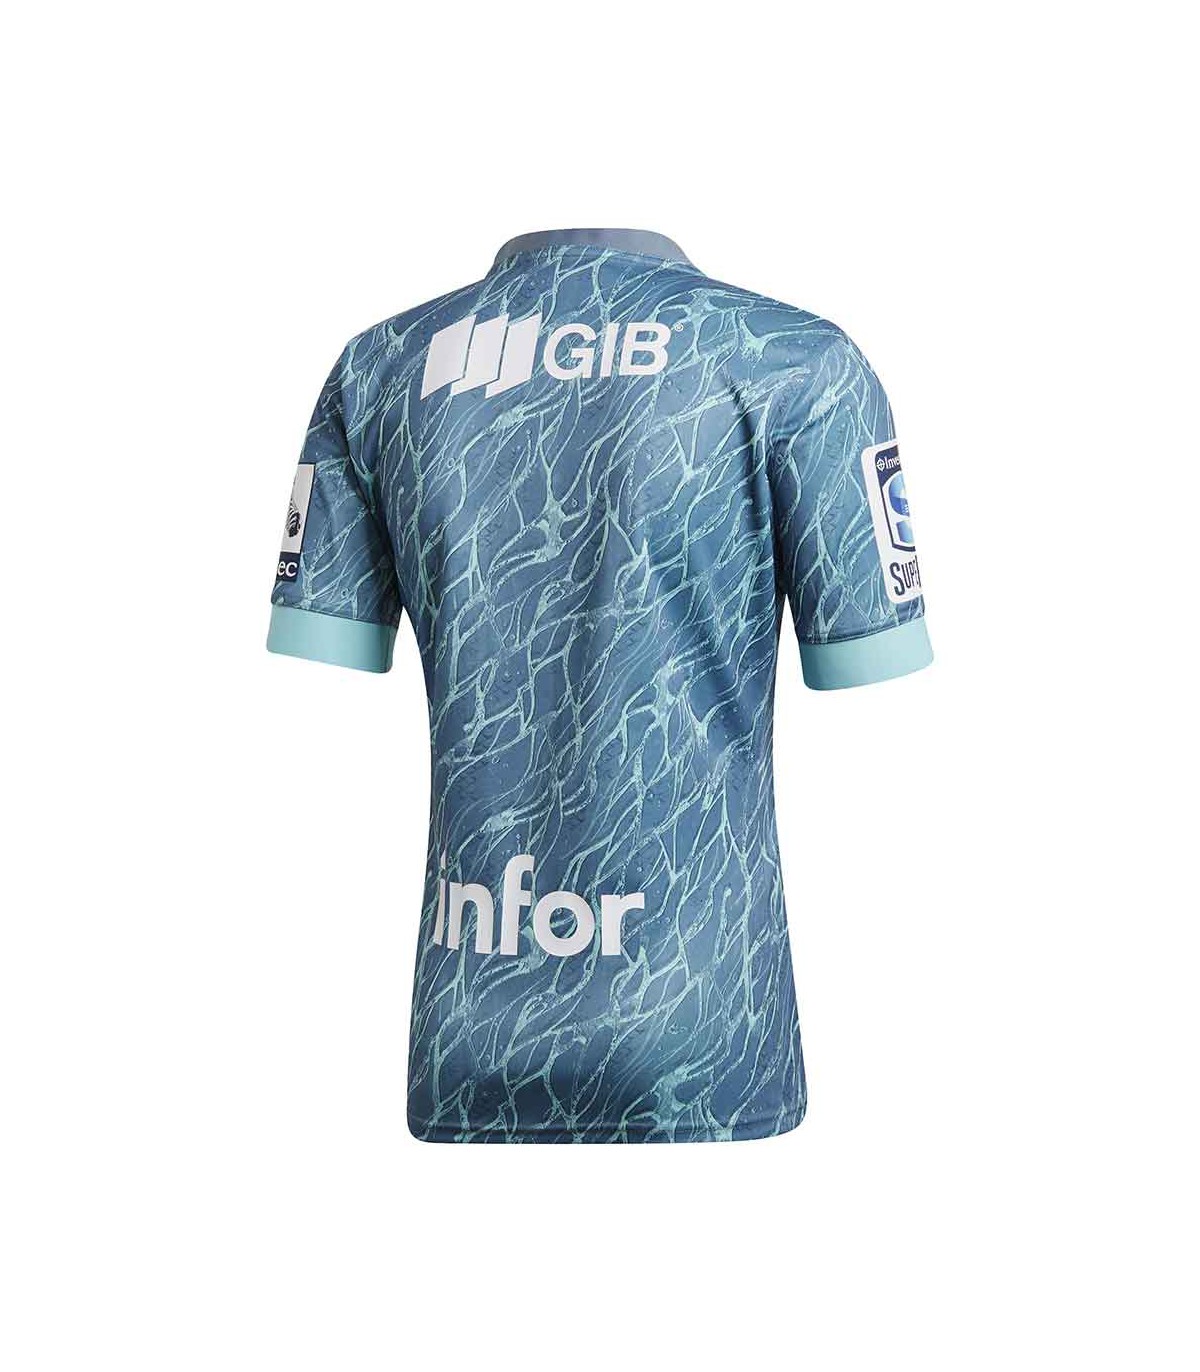 MAILLOT RUGBY CRUSADERS EXTERIEUR 2020/2021 HOMME - ADIDAS chez Rug